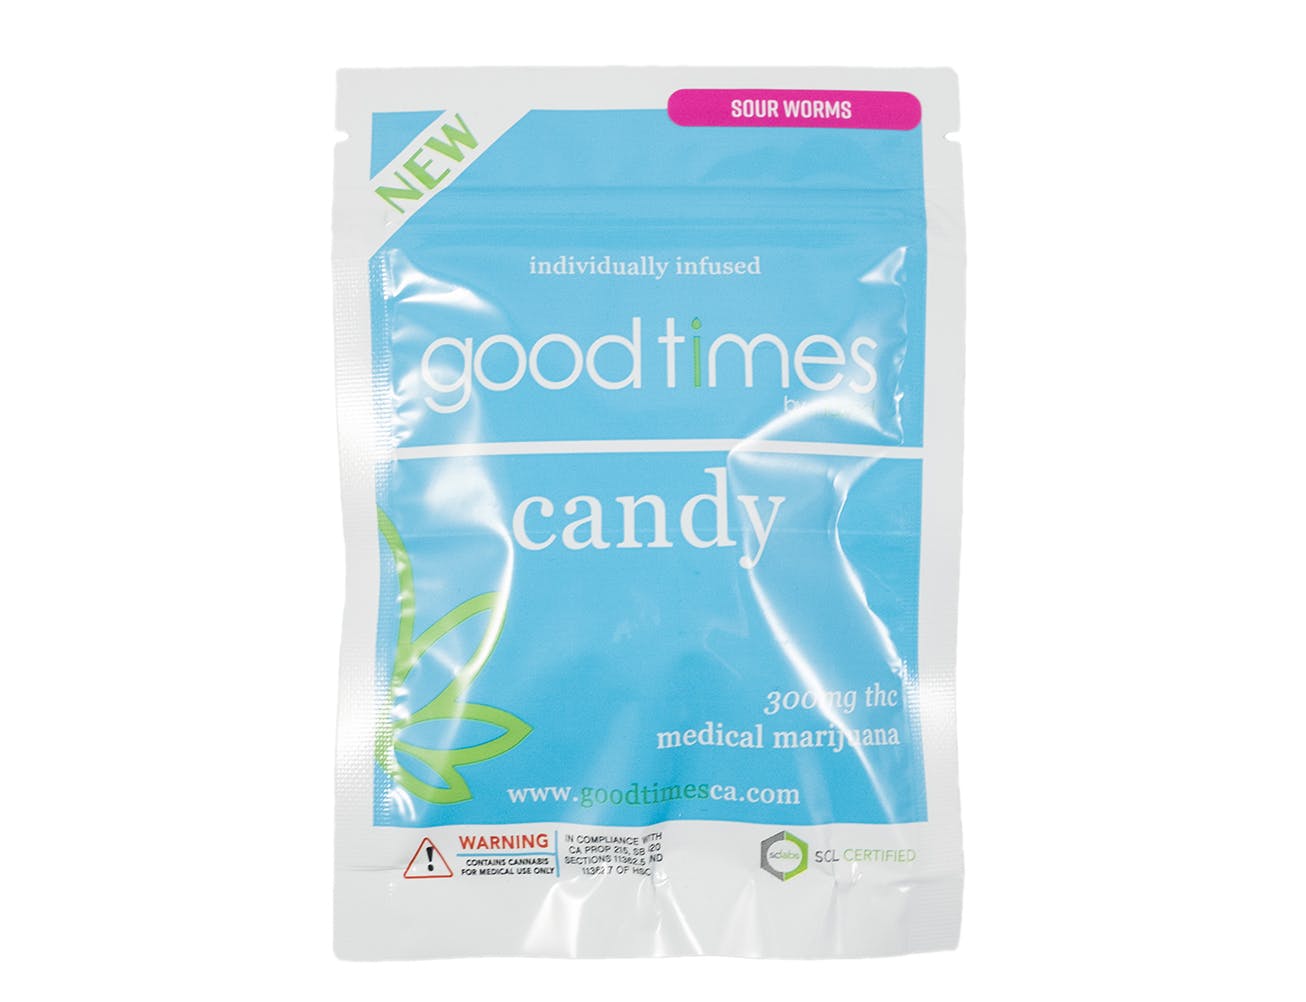 marijuana-dispensaries-1011-west-84th-place-los-angeles-goodtimes-candy-300mg-sour-worms